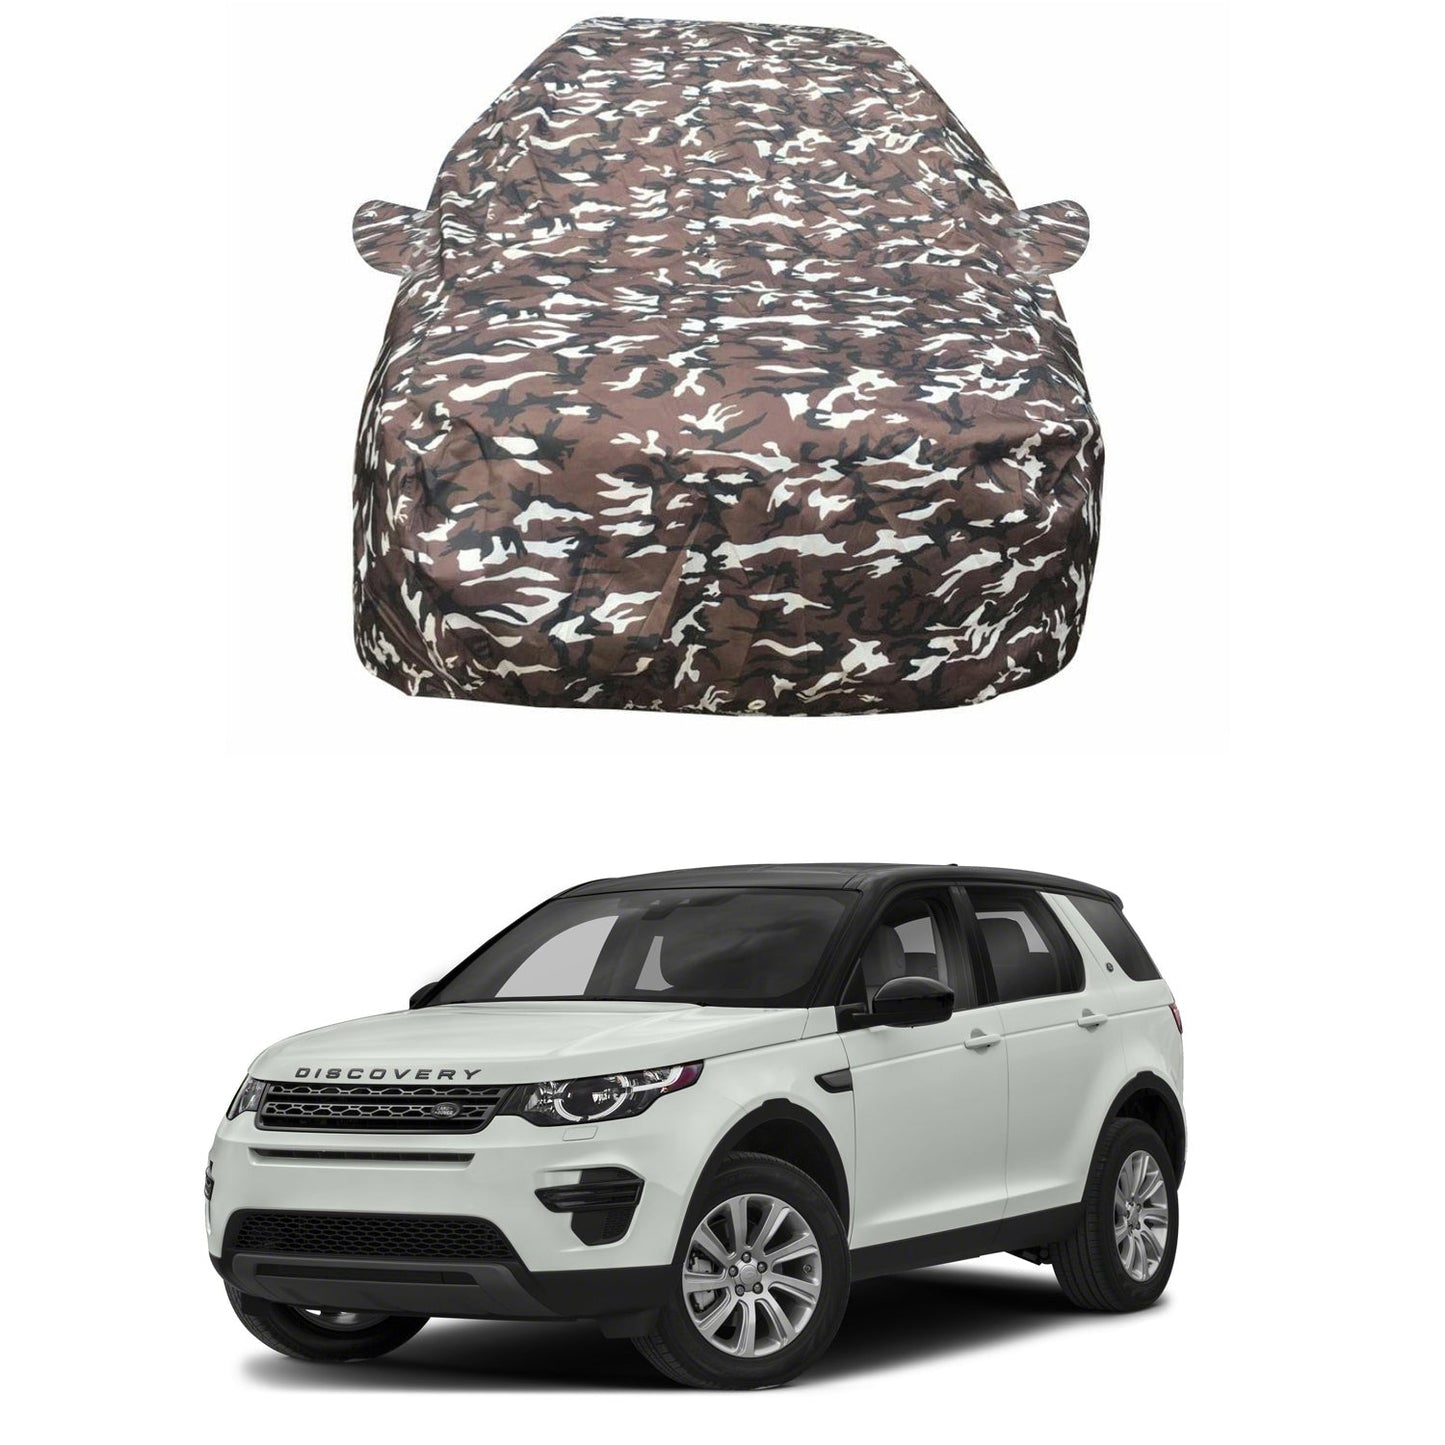 Oshotto Ranger Design Made of 100% Waterproof Fabric Car Body Cover with Mirror Pocket For Land Rover Discovery Sport